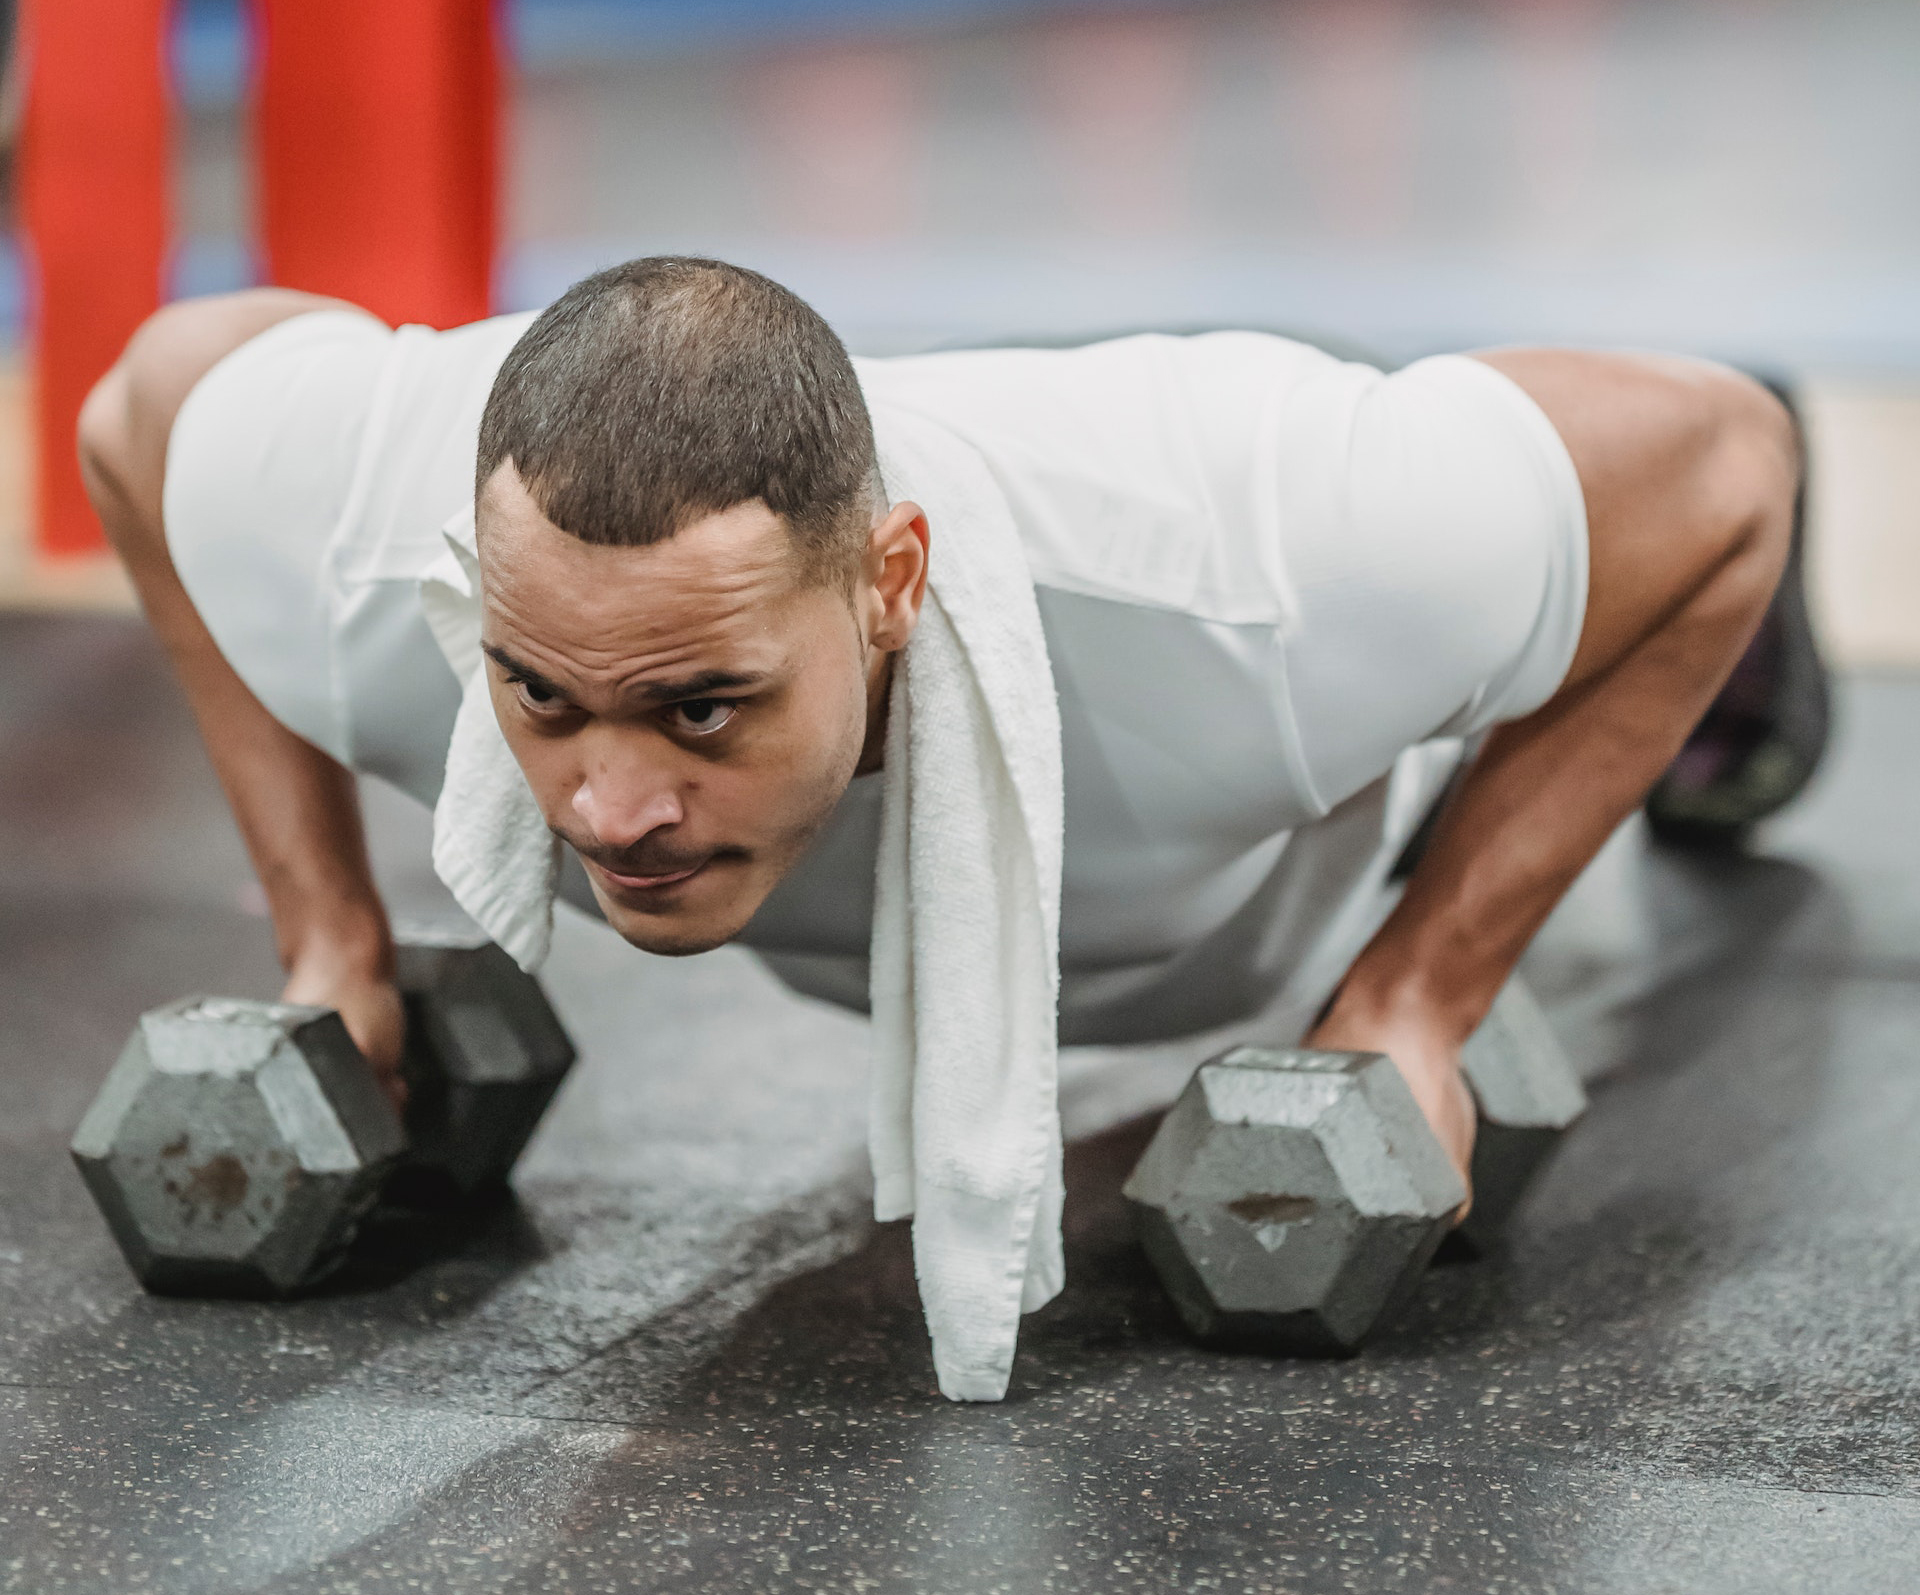 "A man wearing a white shirt with short hair holds weights in his hands while doing pushups on the floor of a gym."